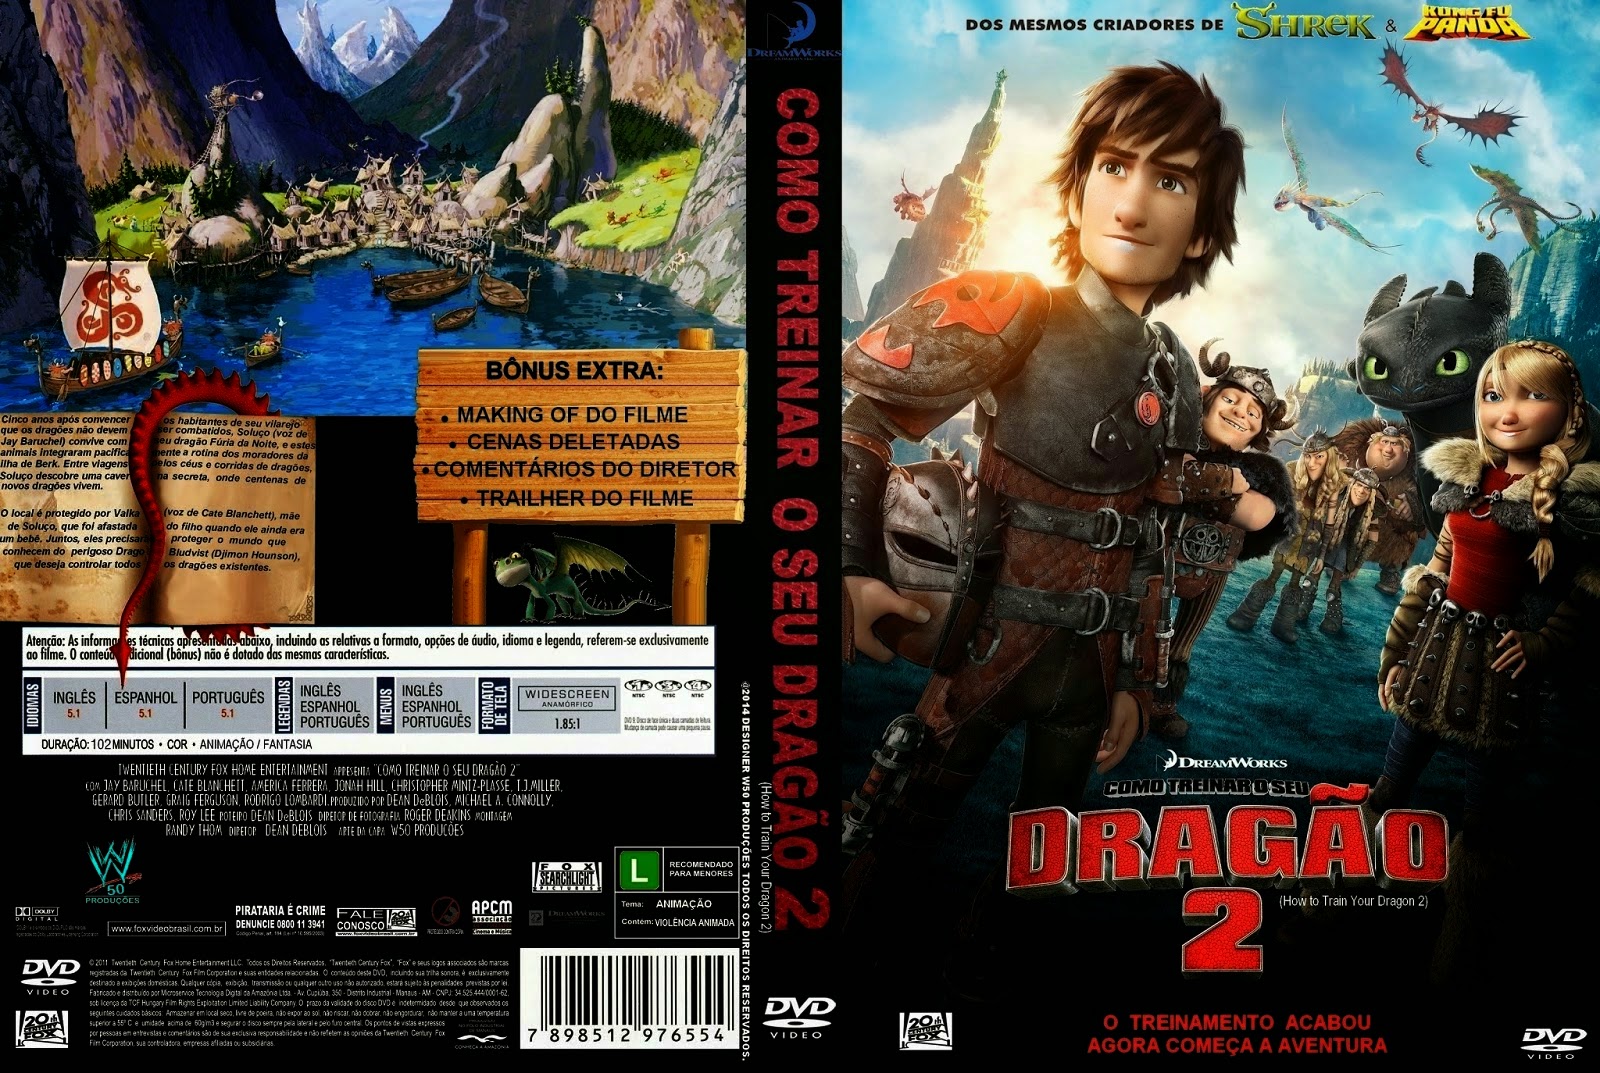 How to Train Your Dragon 2 - 2014 - Arabic Subtitles